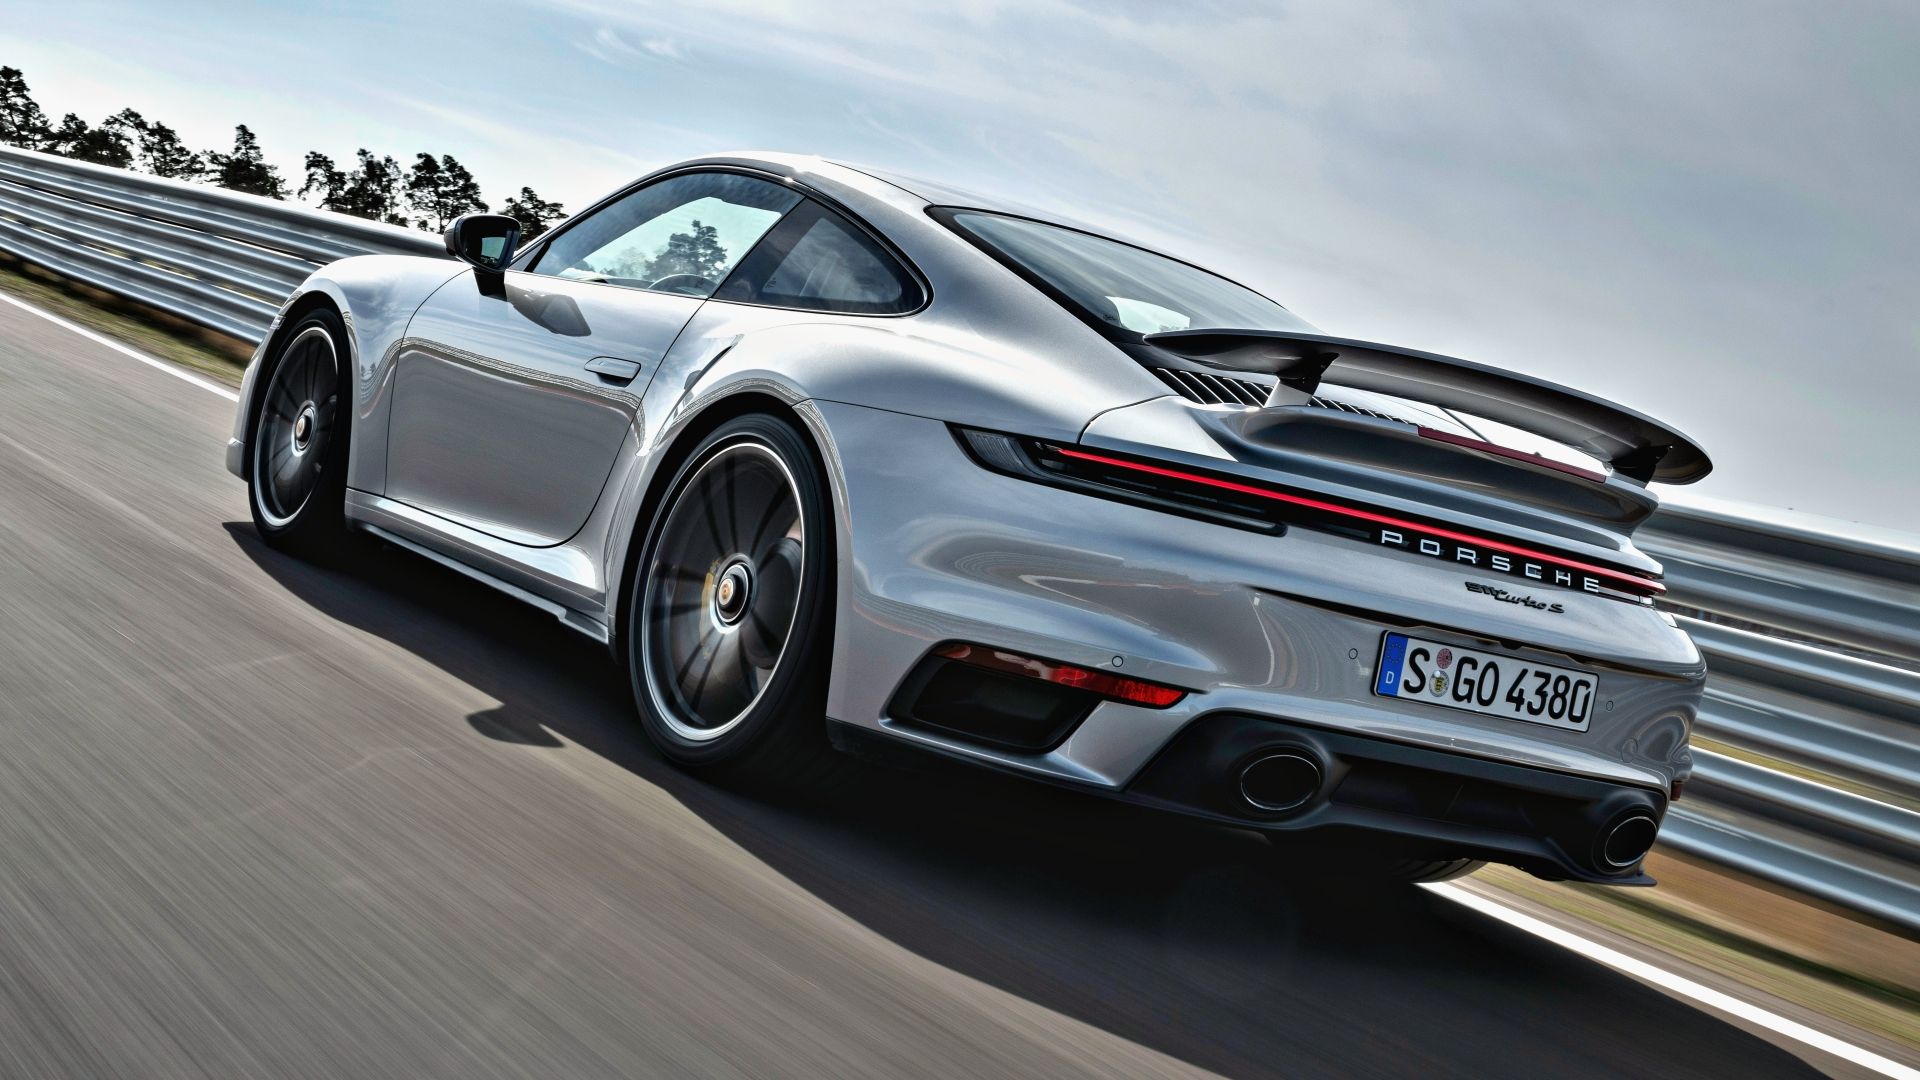 Porsche Explains Why The New 911 Turbo S Is Way More Powerful